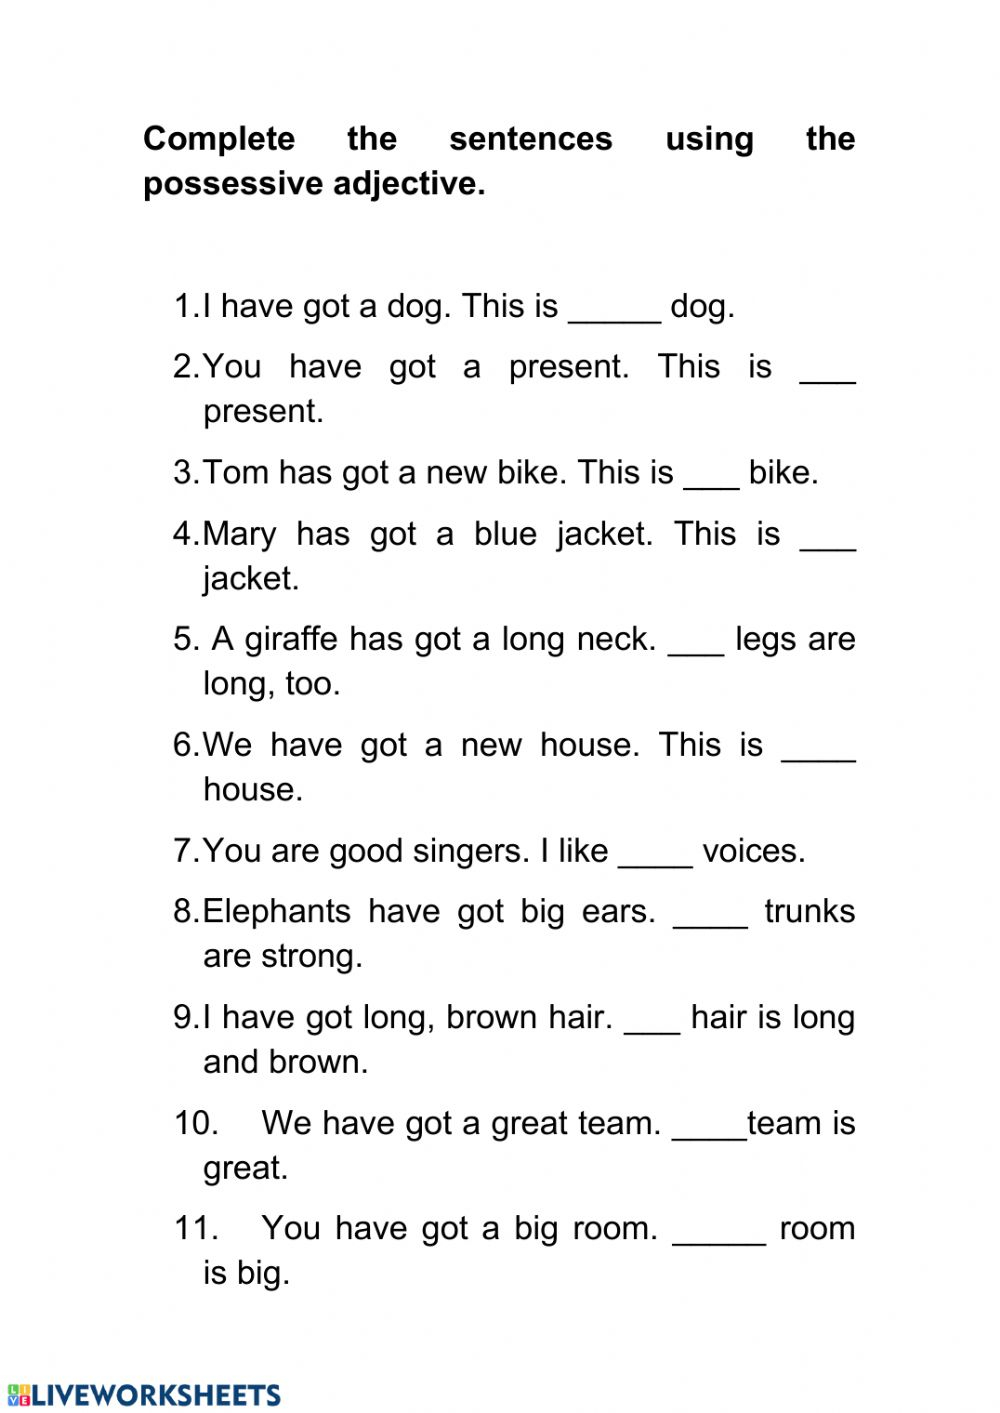 Possessive Adjectives And Pronouns Interactive Worksheet